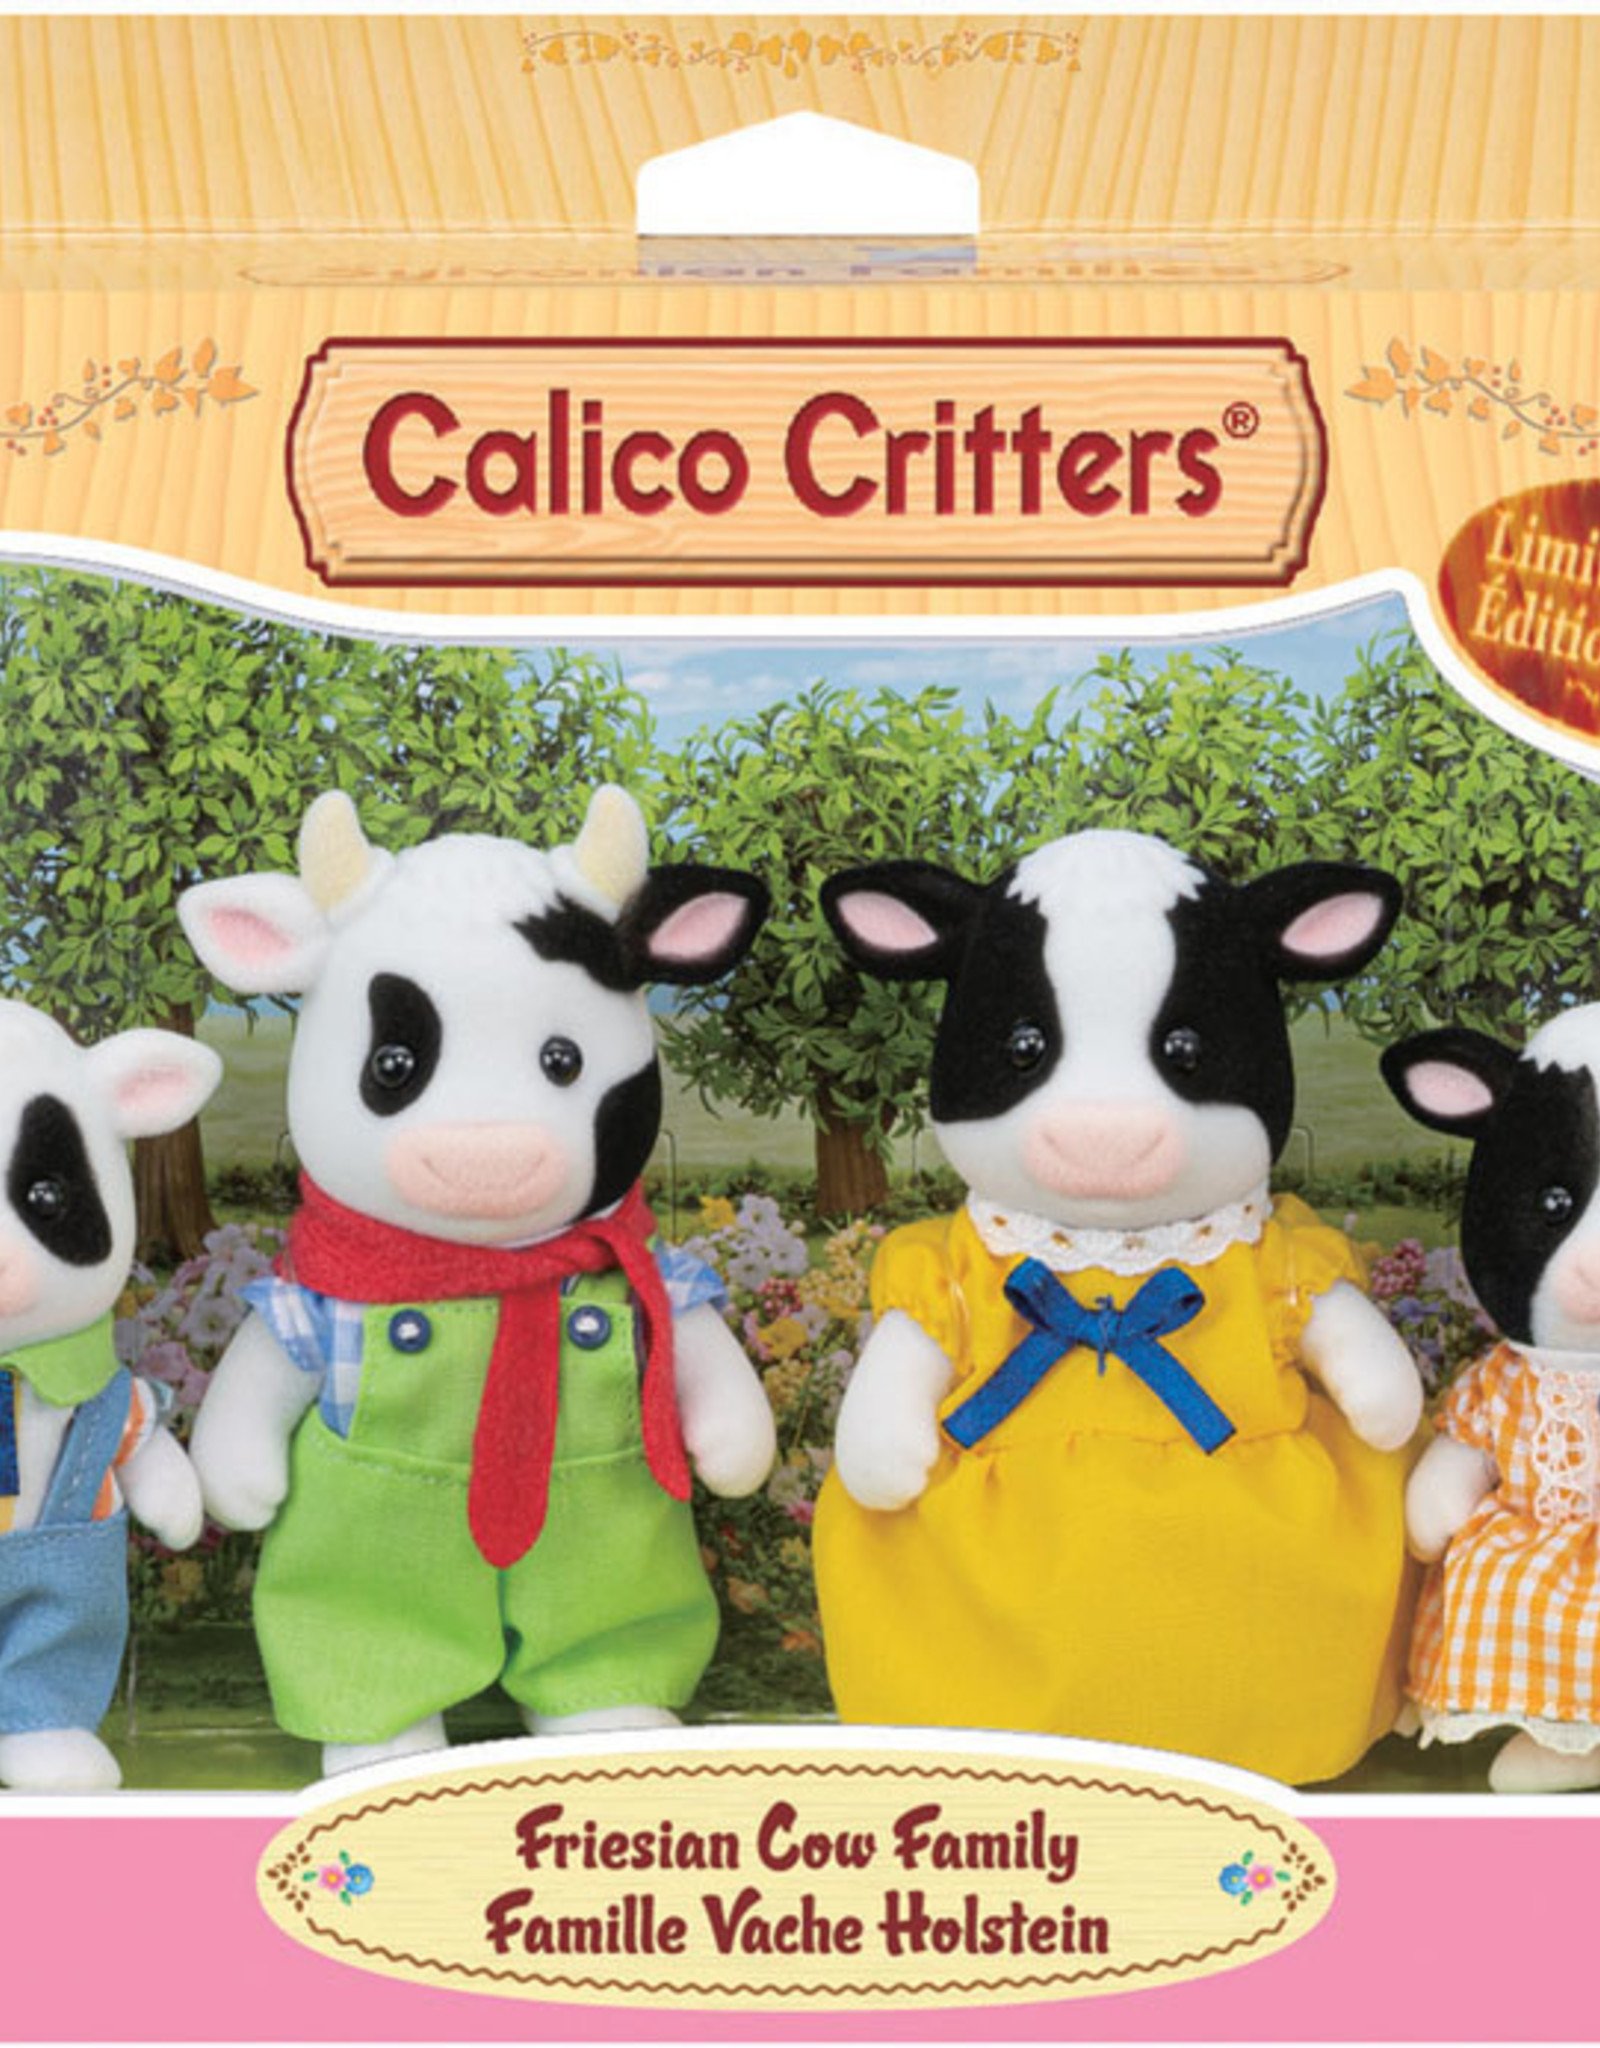 INTERNATIONAL PLAYTHINGS EPOCH FRIESIAN COW FAMILY LIMITED EDITION